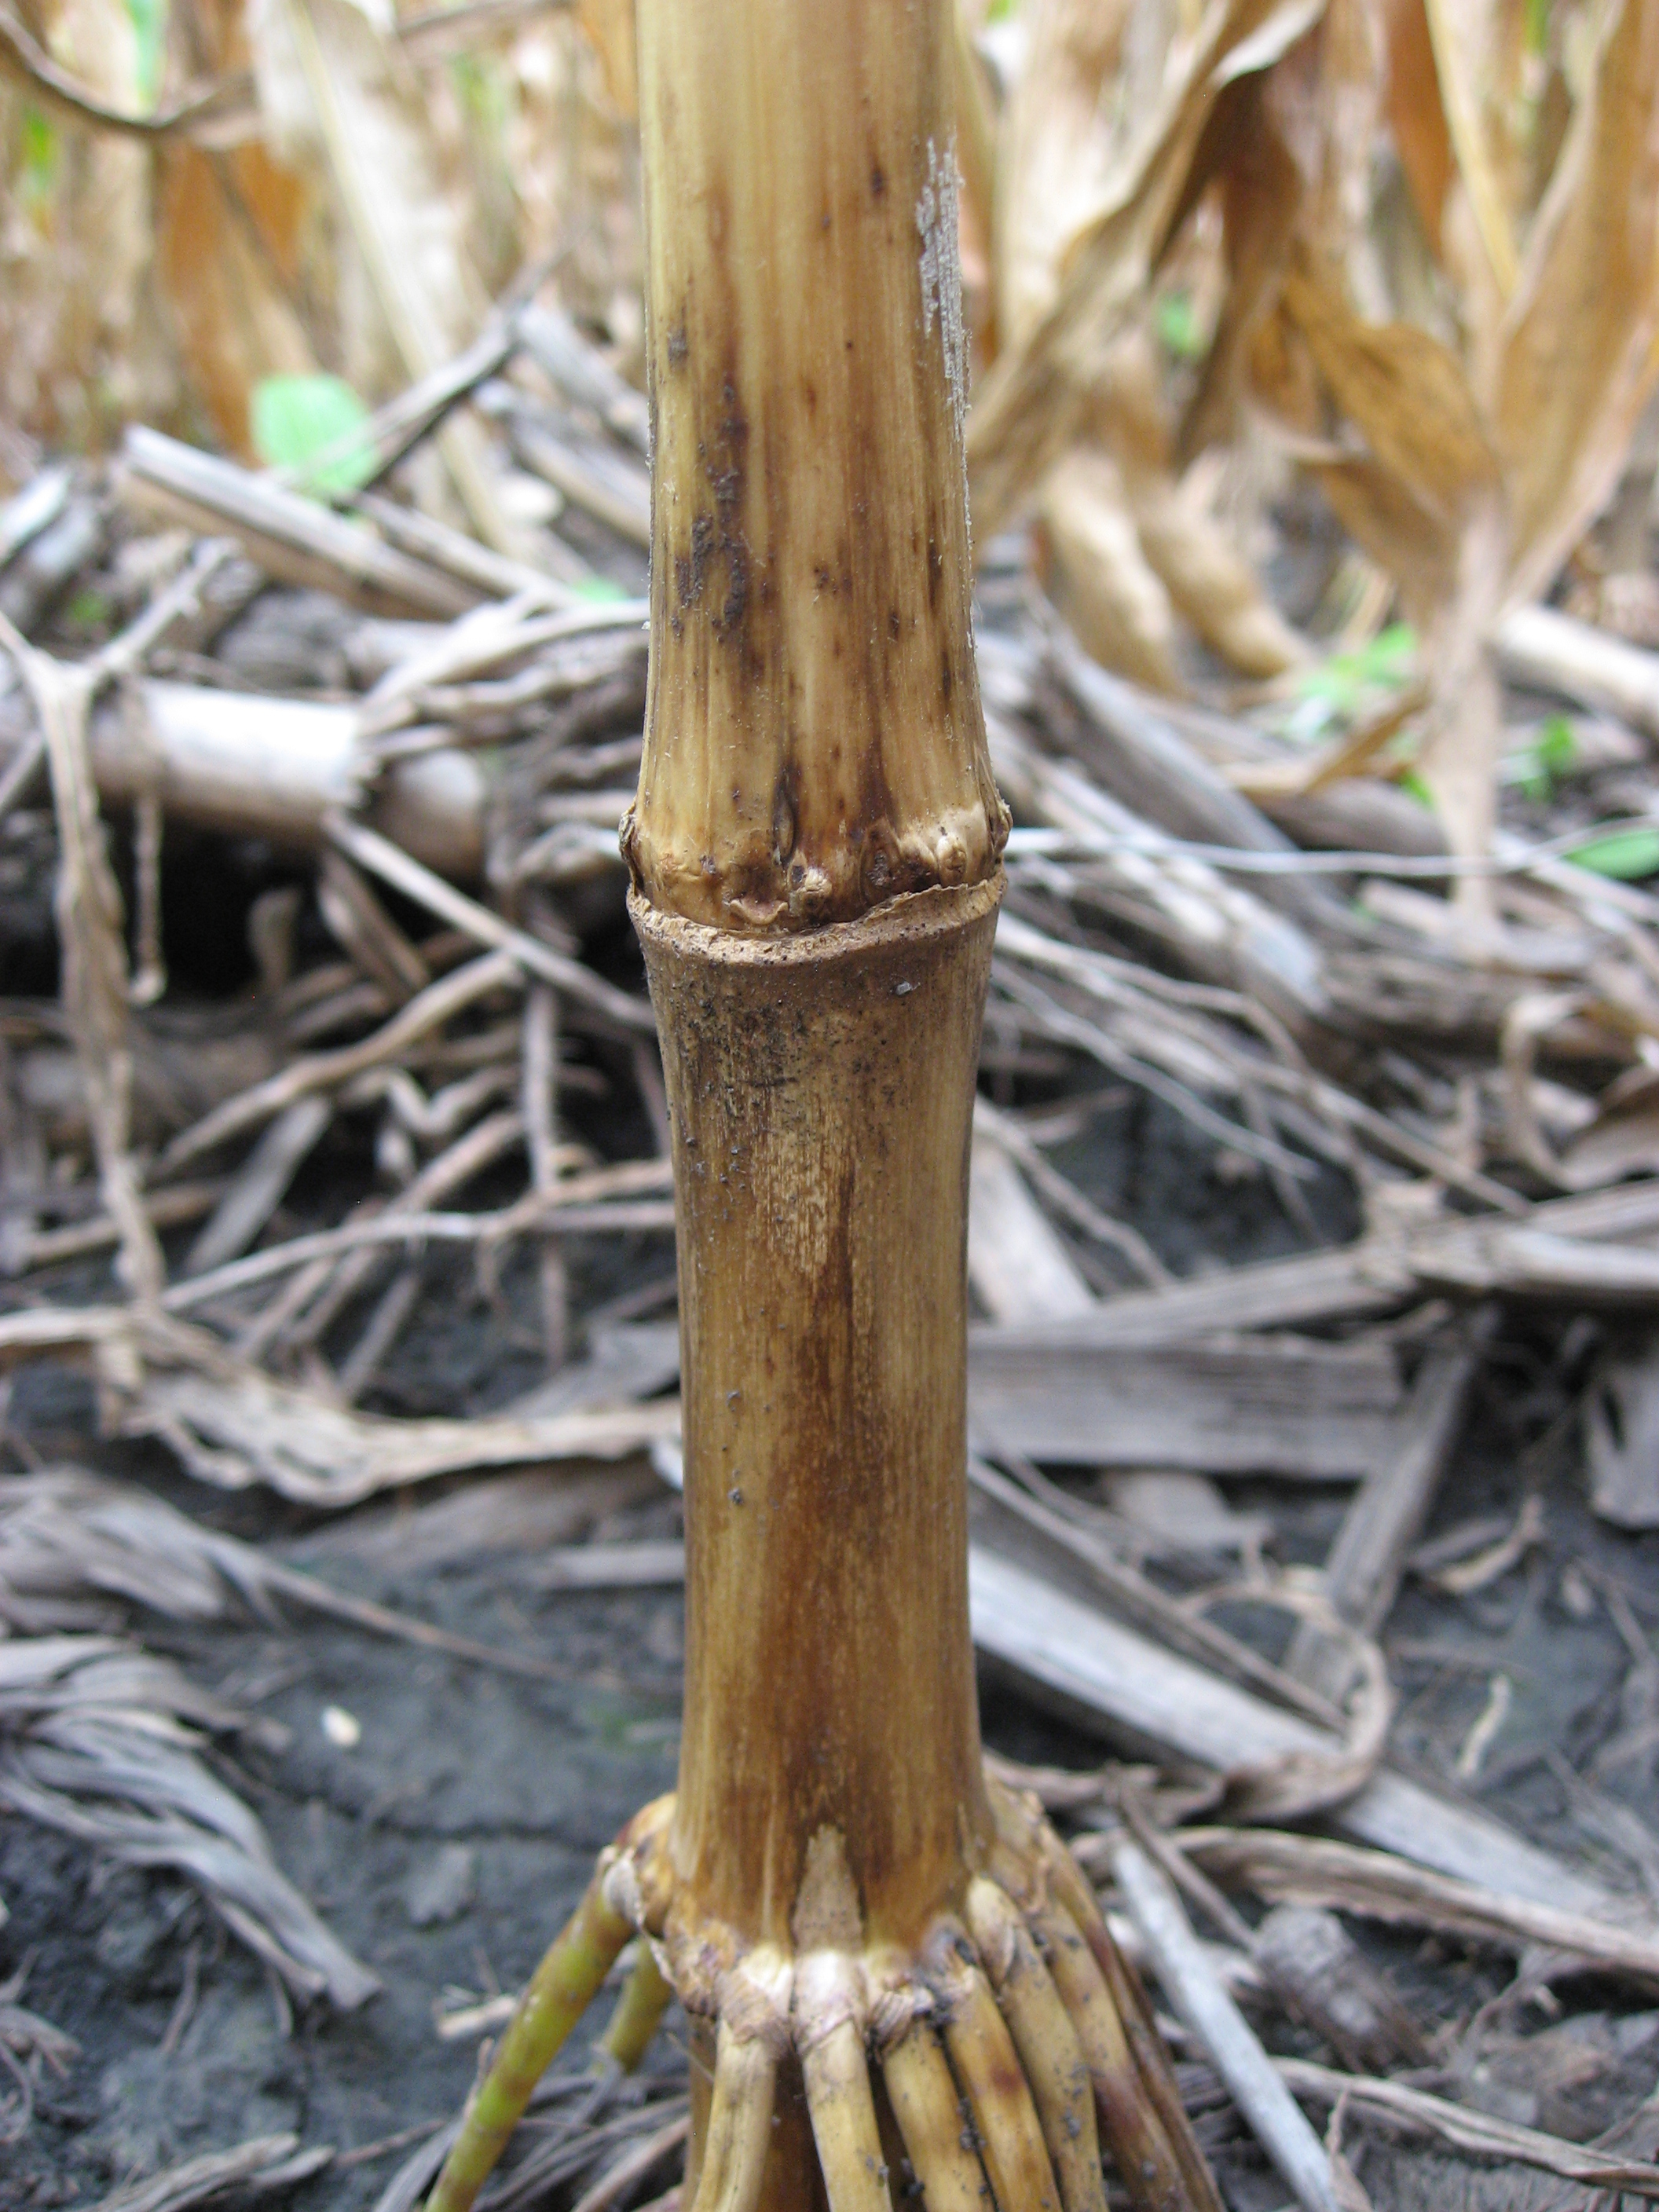 Fusarium stalk rot can cause brown streaks on the lower internodes.